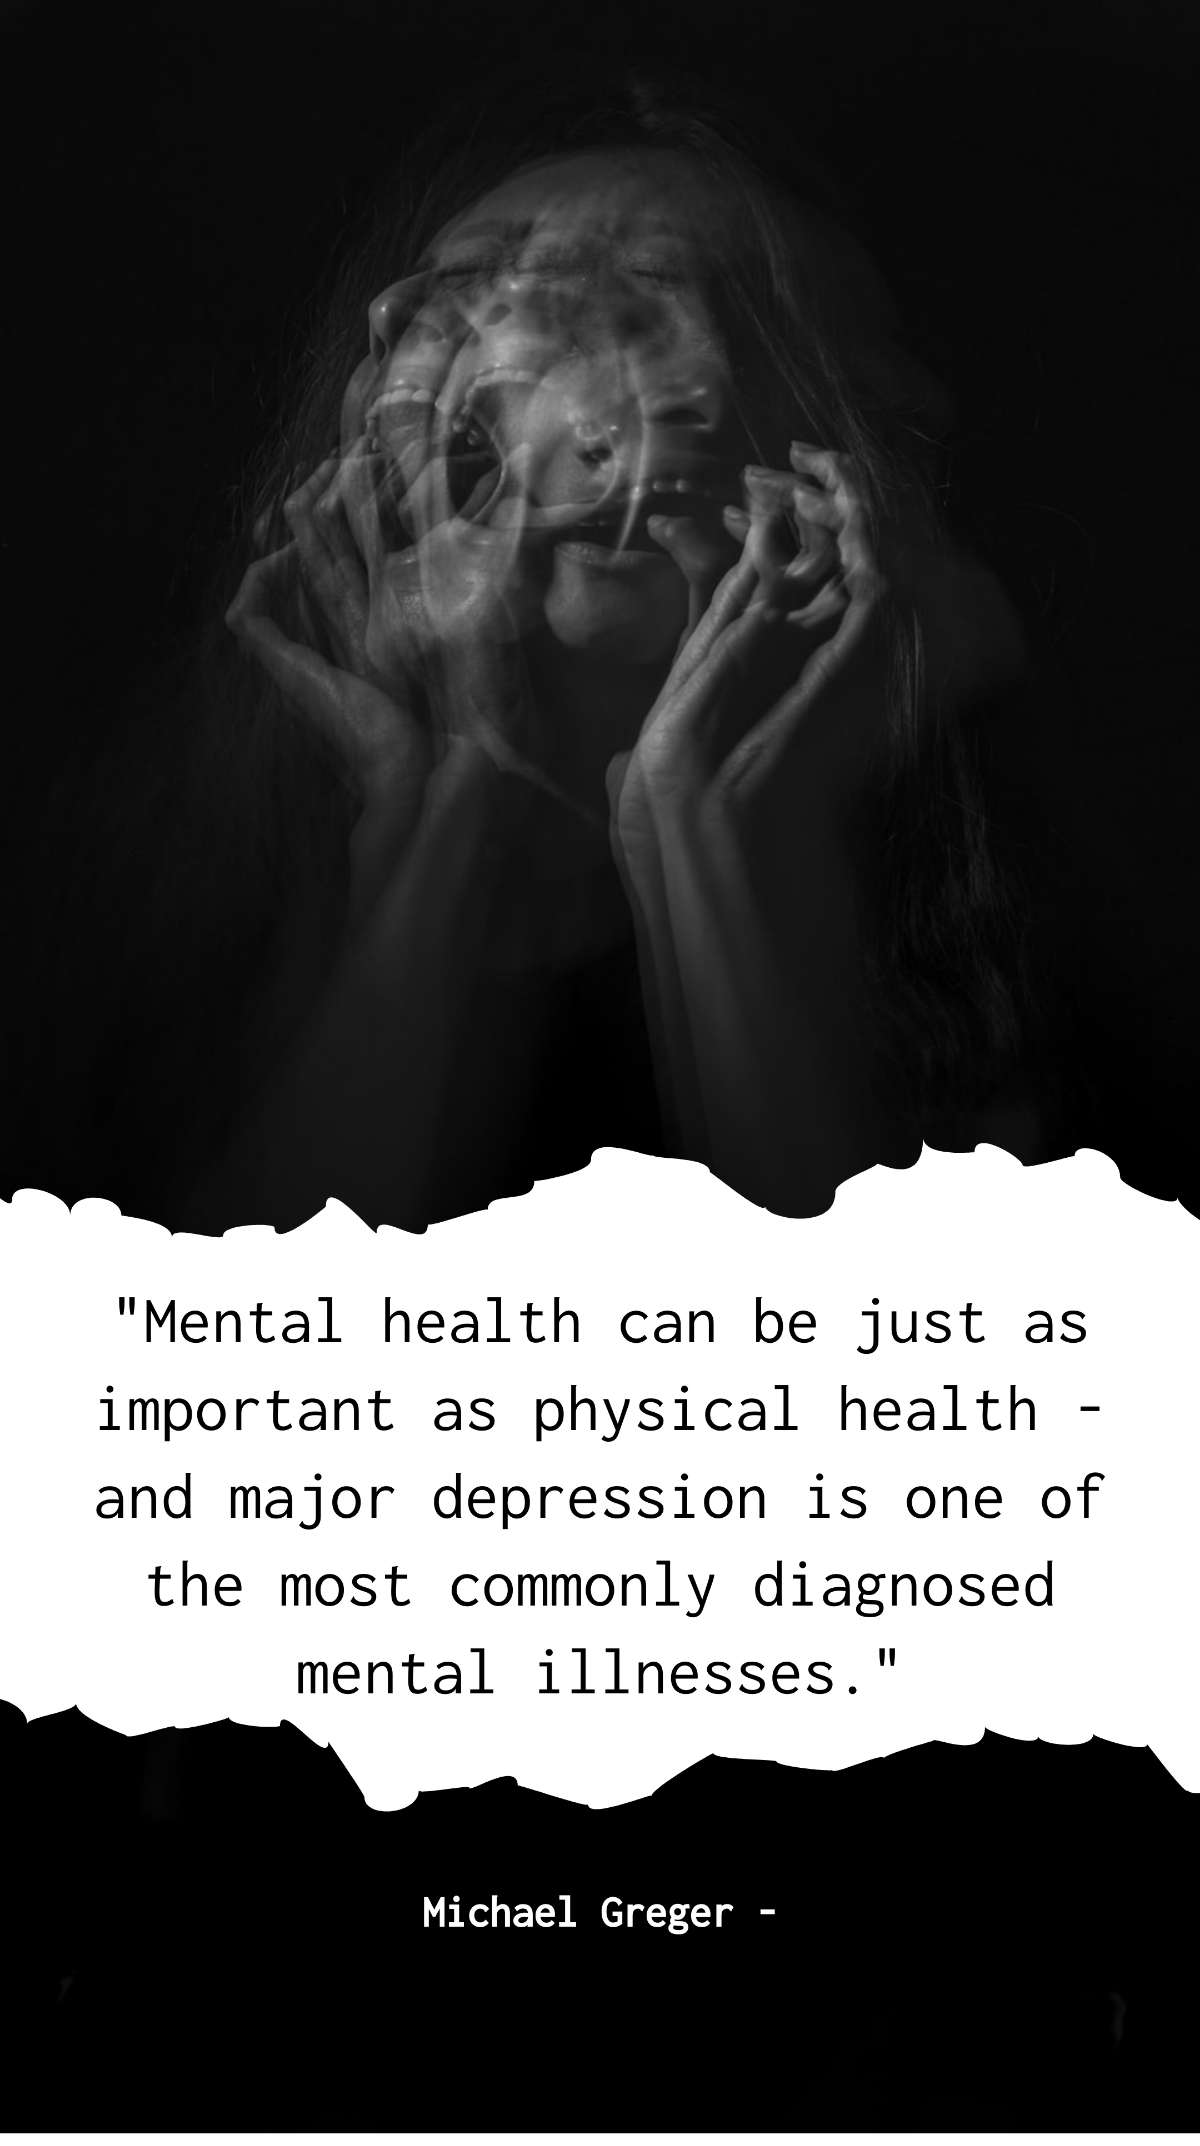 Michael Greger - Mental health can be just as important as physical health - and major depression is one of the most commonly diagnosed mental illnesses. Template